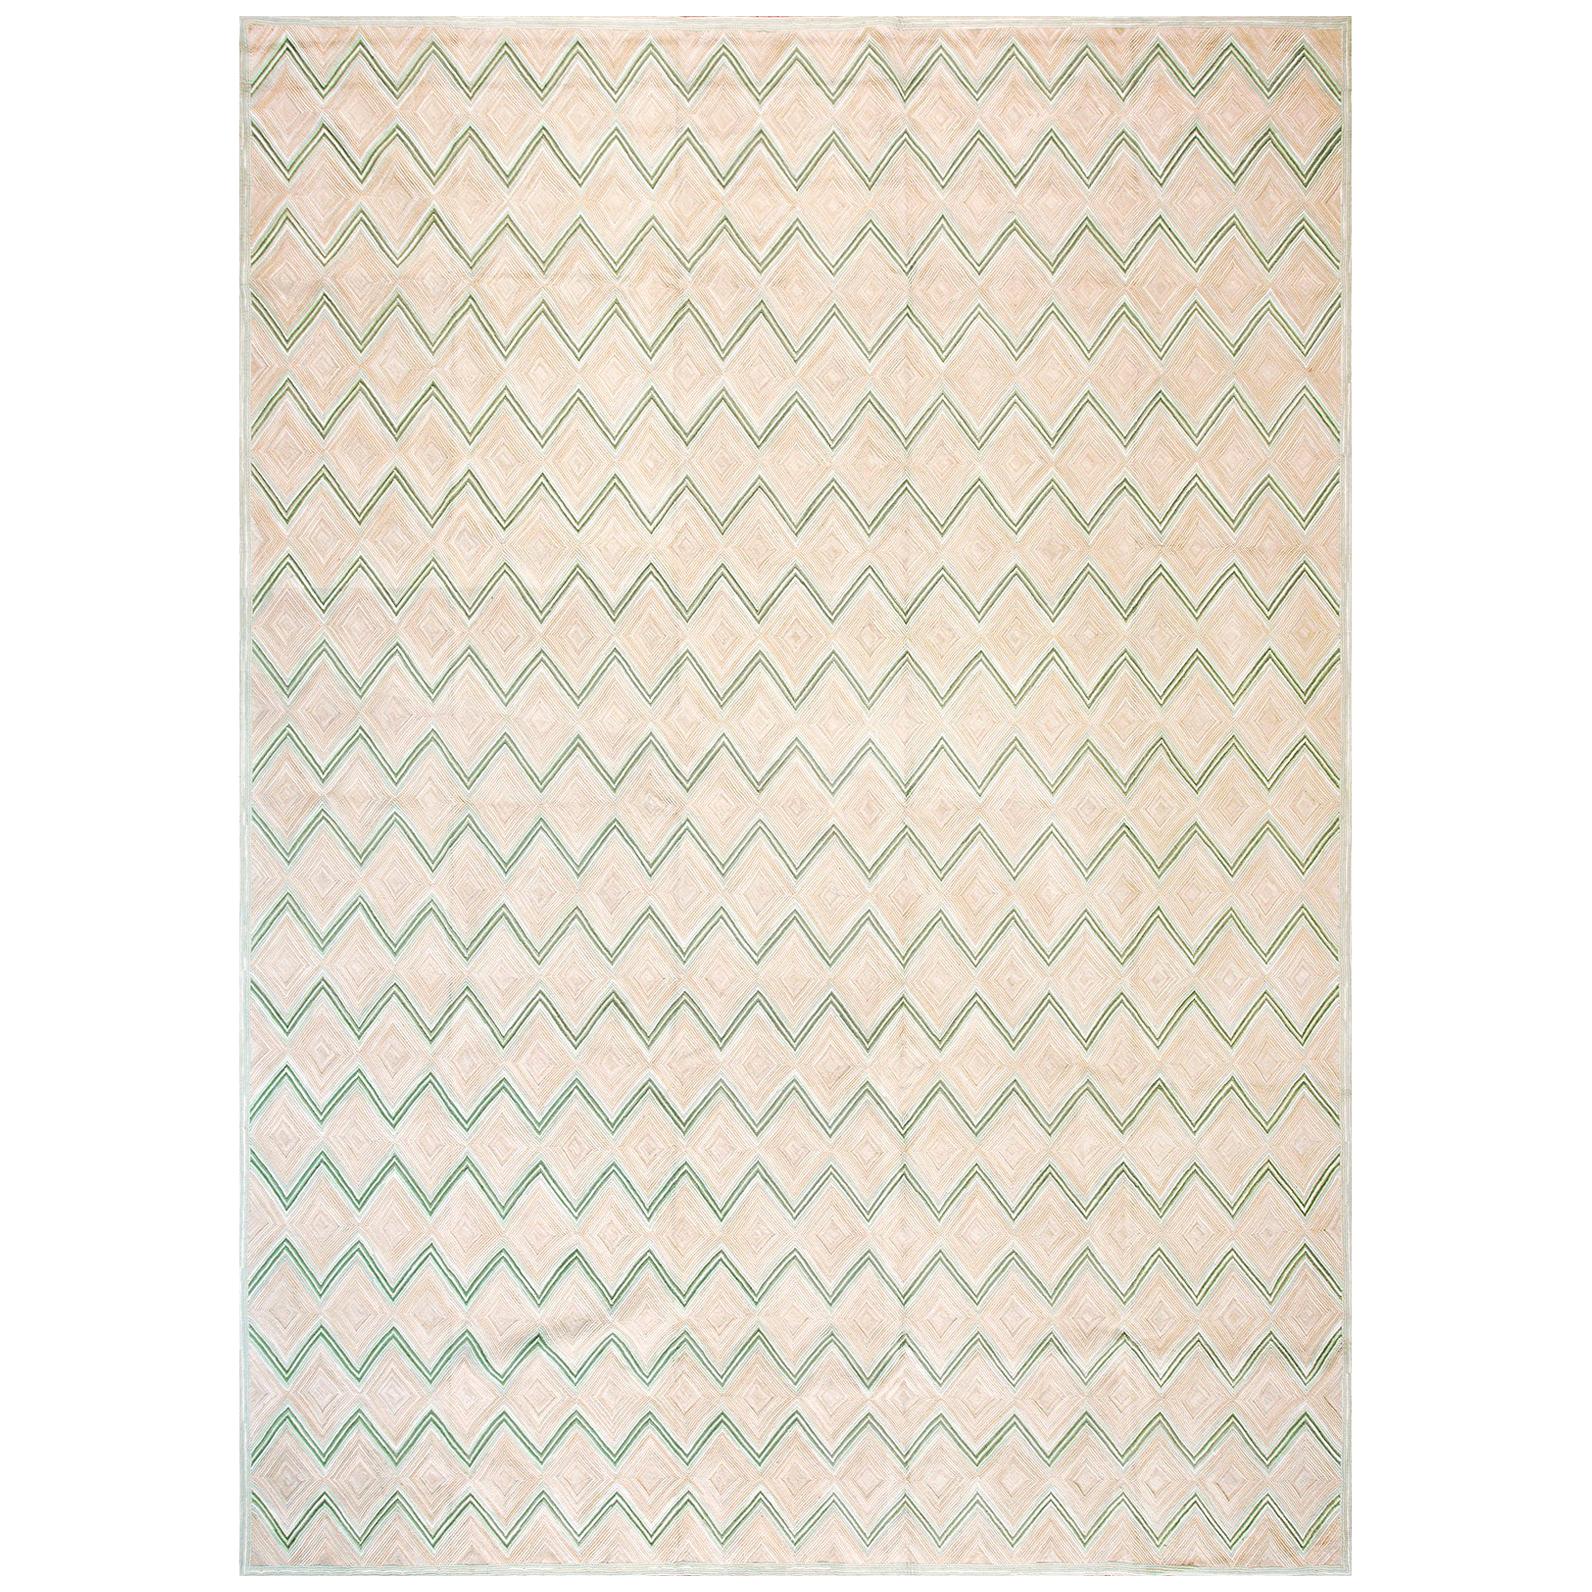 Contemporary Cotton Hooked Rug ( 6' x 9' - 245 x 305 )